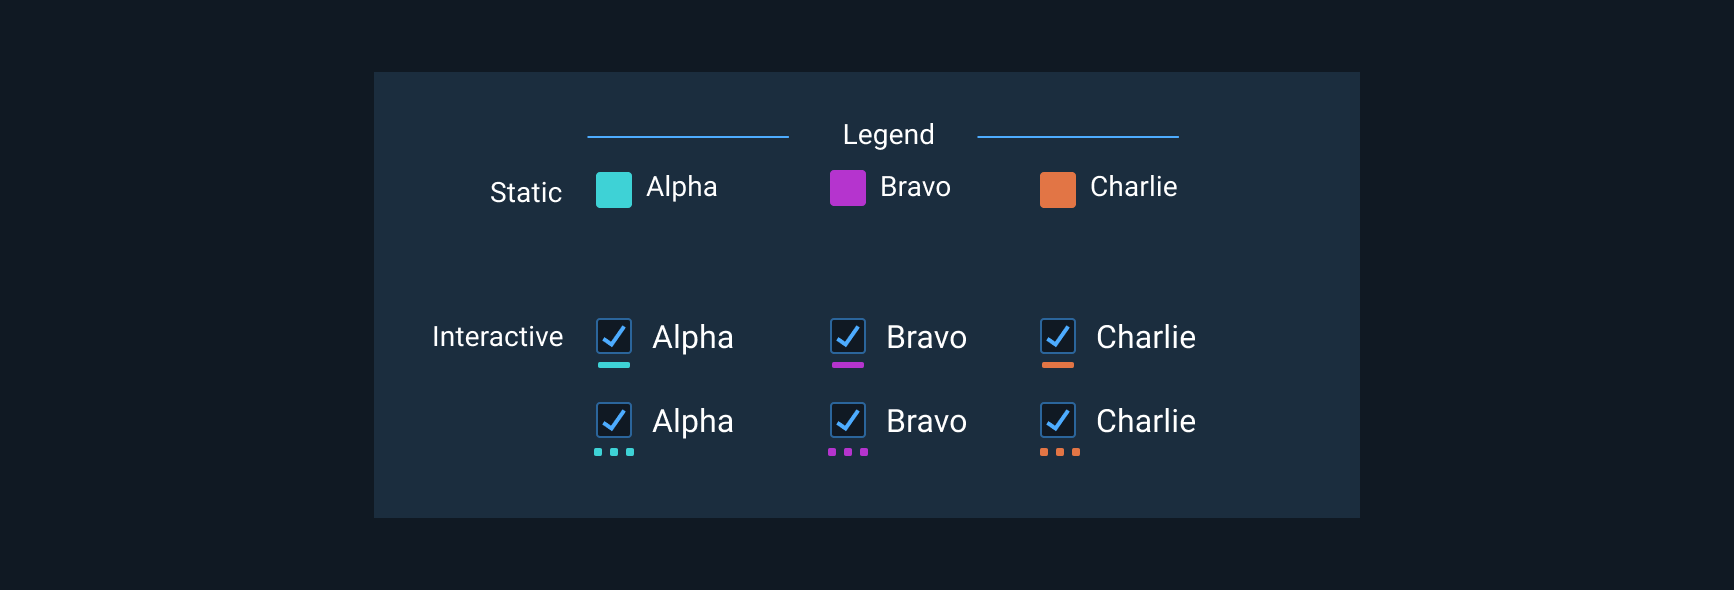 Example of legend treatment in a chart view